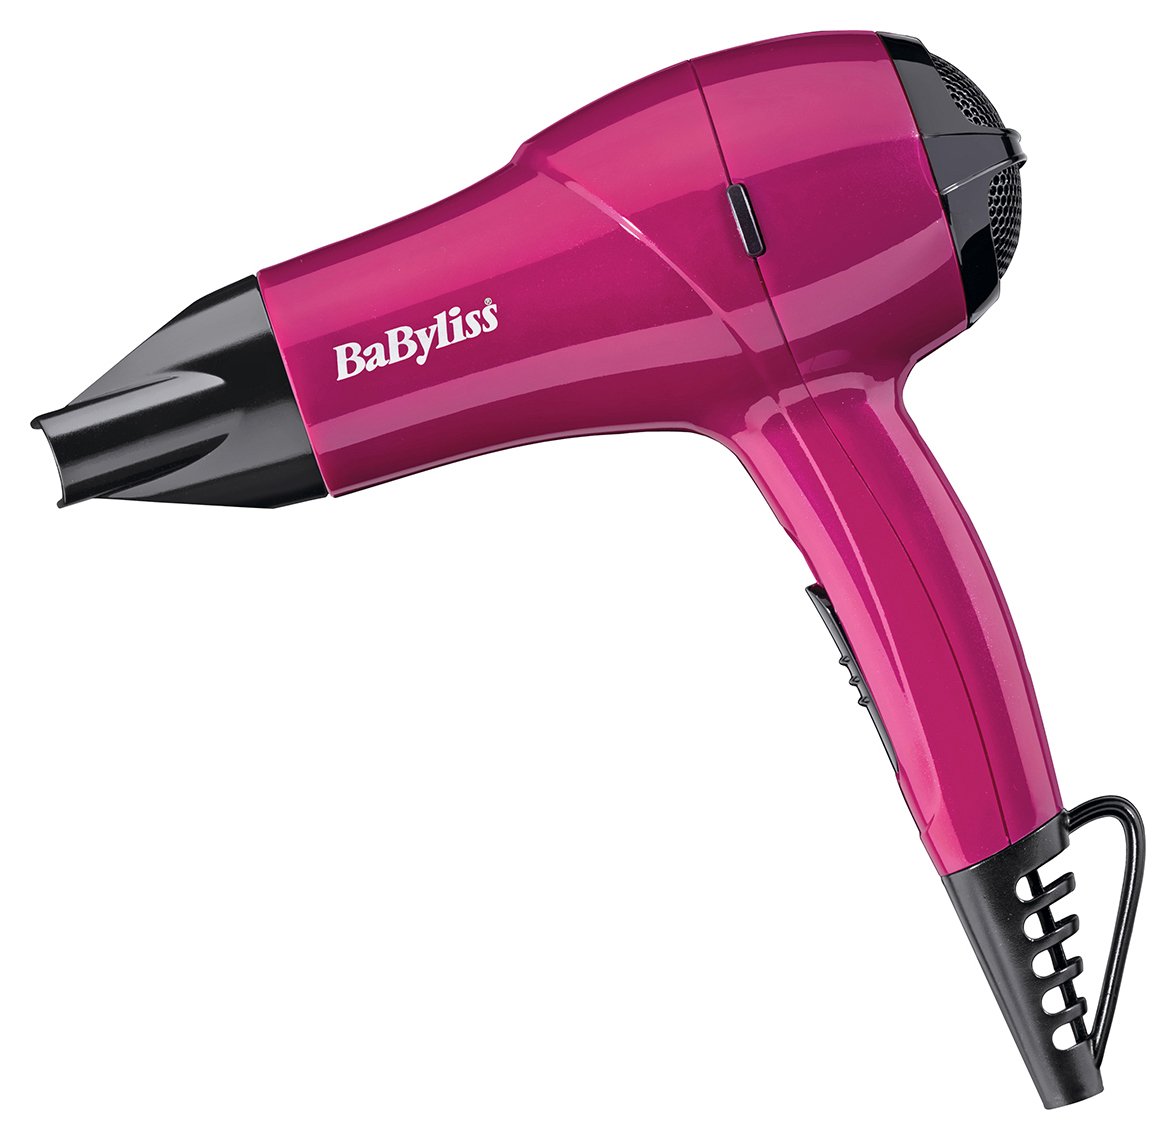 Babyliss Hair Dryer Find It For Less